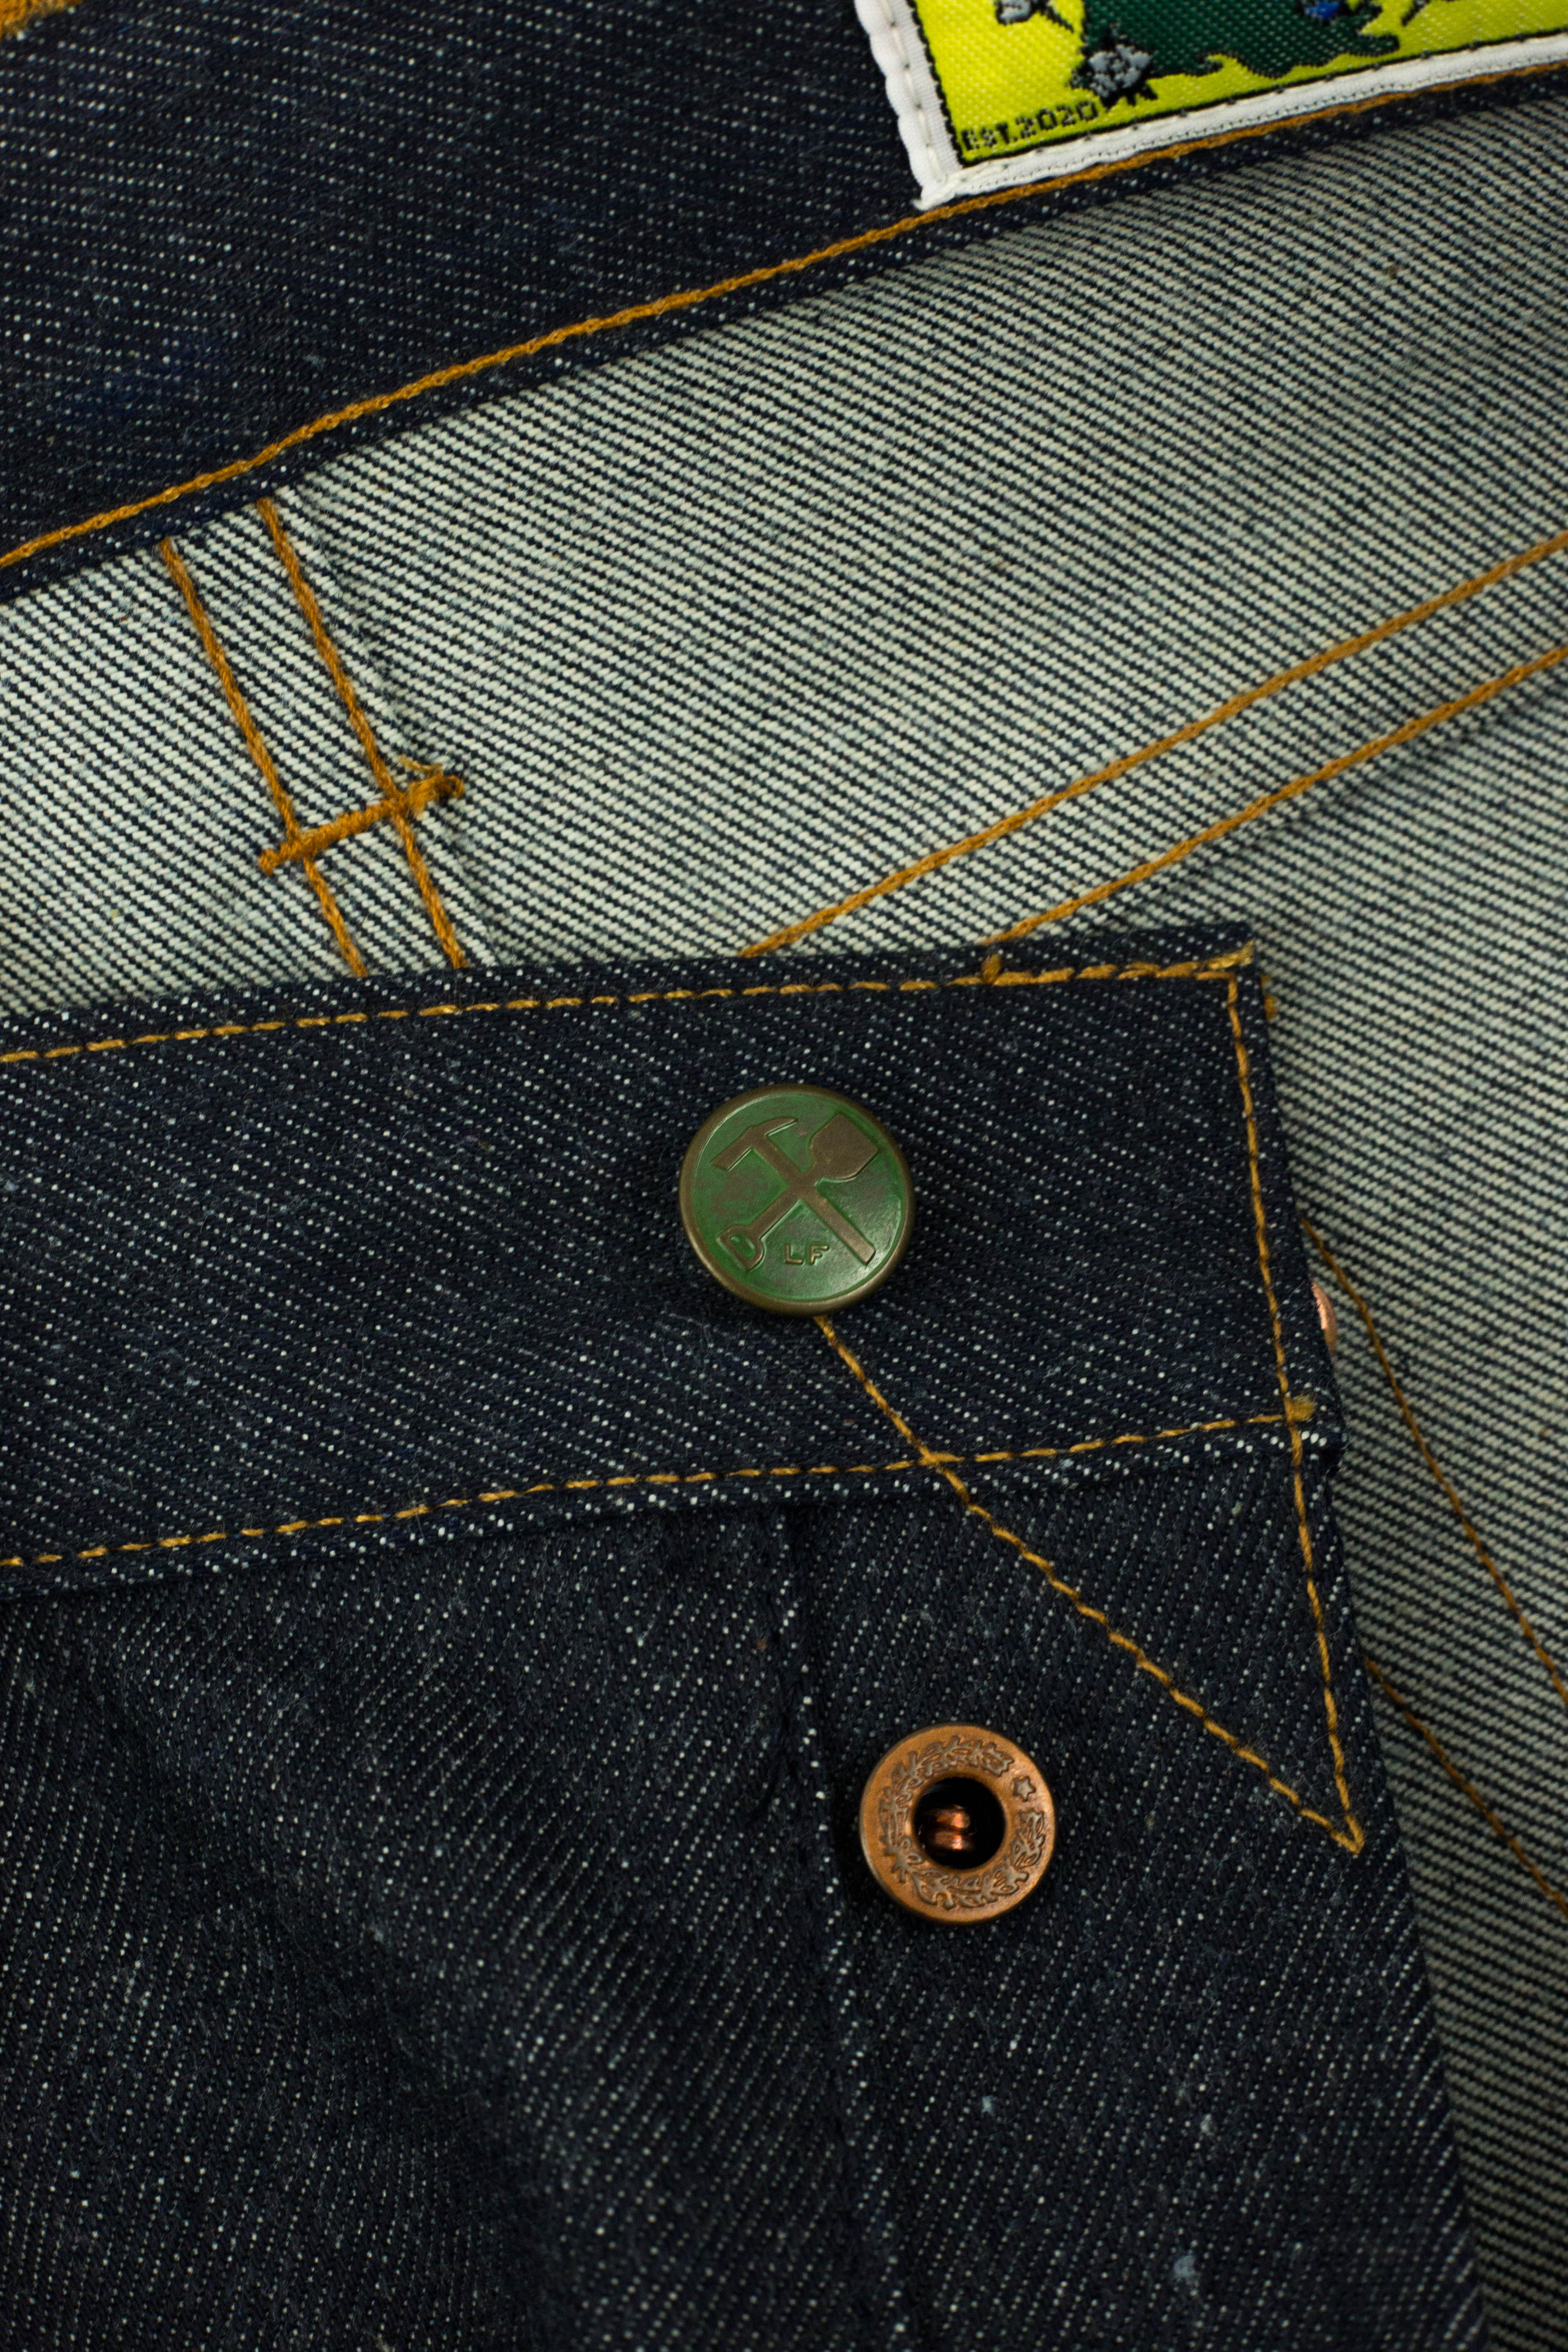 Where You Can Still Buy American-made Cone Mills Selvedge Denim